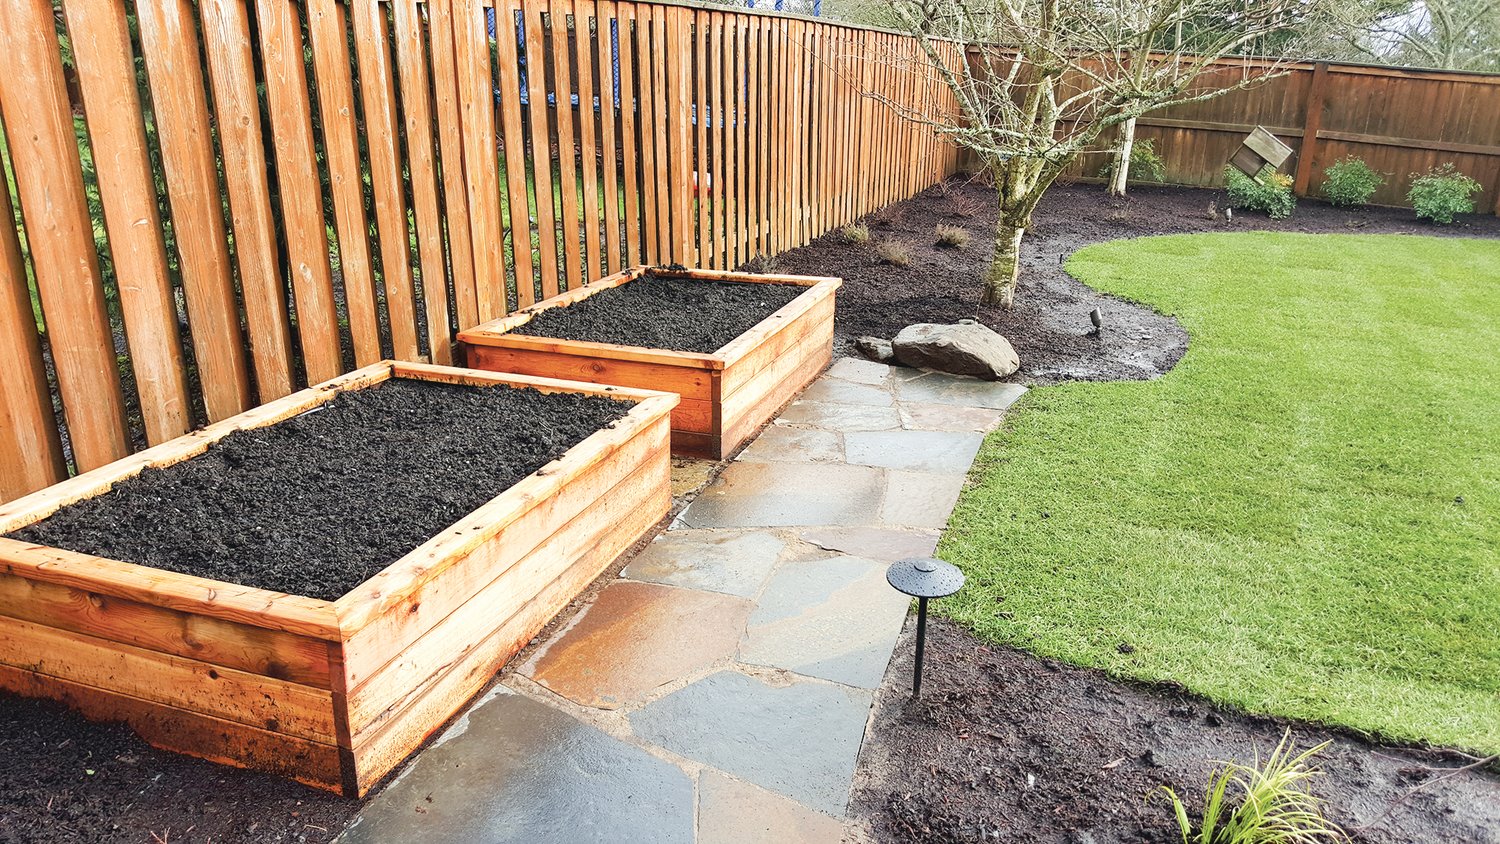 Gardening in raised beds is a popular feature in many backyards where berries, fruits and vegetables can be enjoyed. Boulder Falls Landscaping said this is a popular request by many of their clients who have small lots.